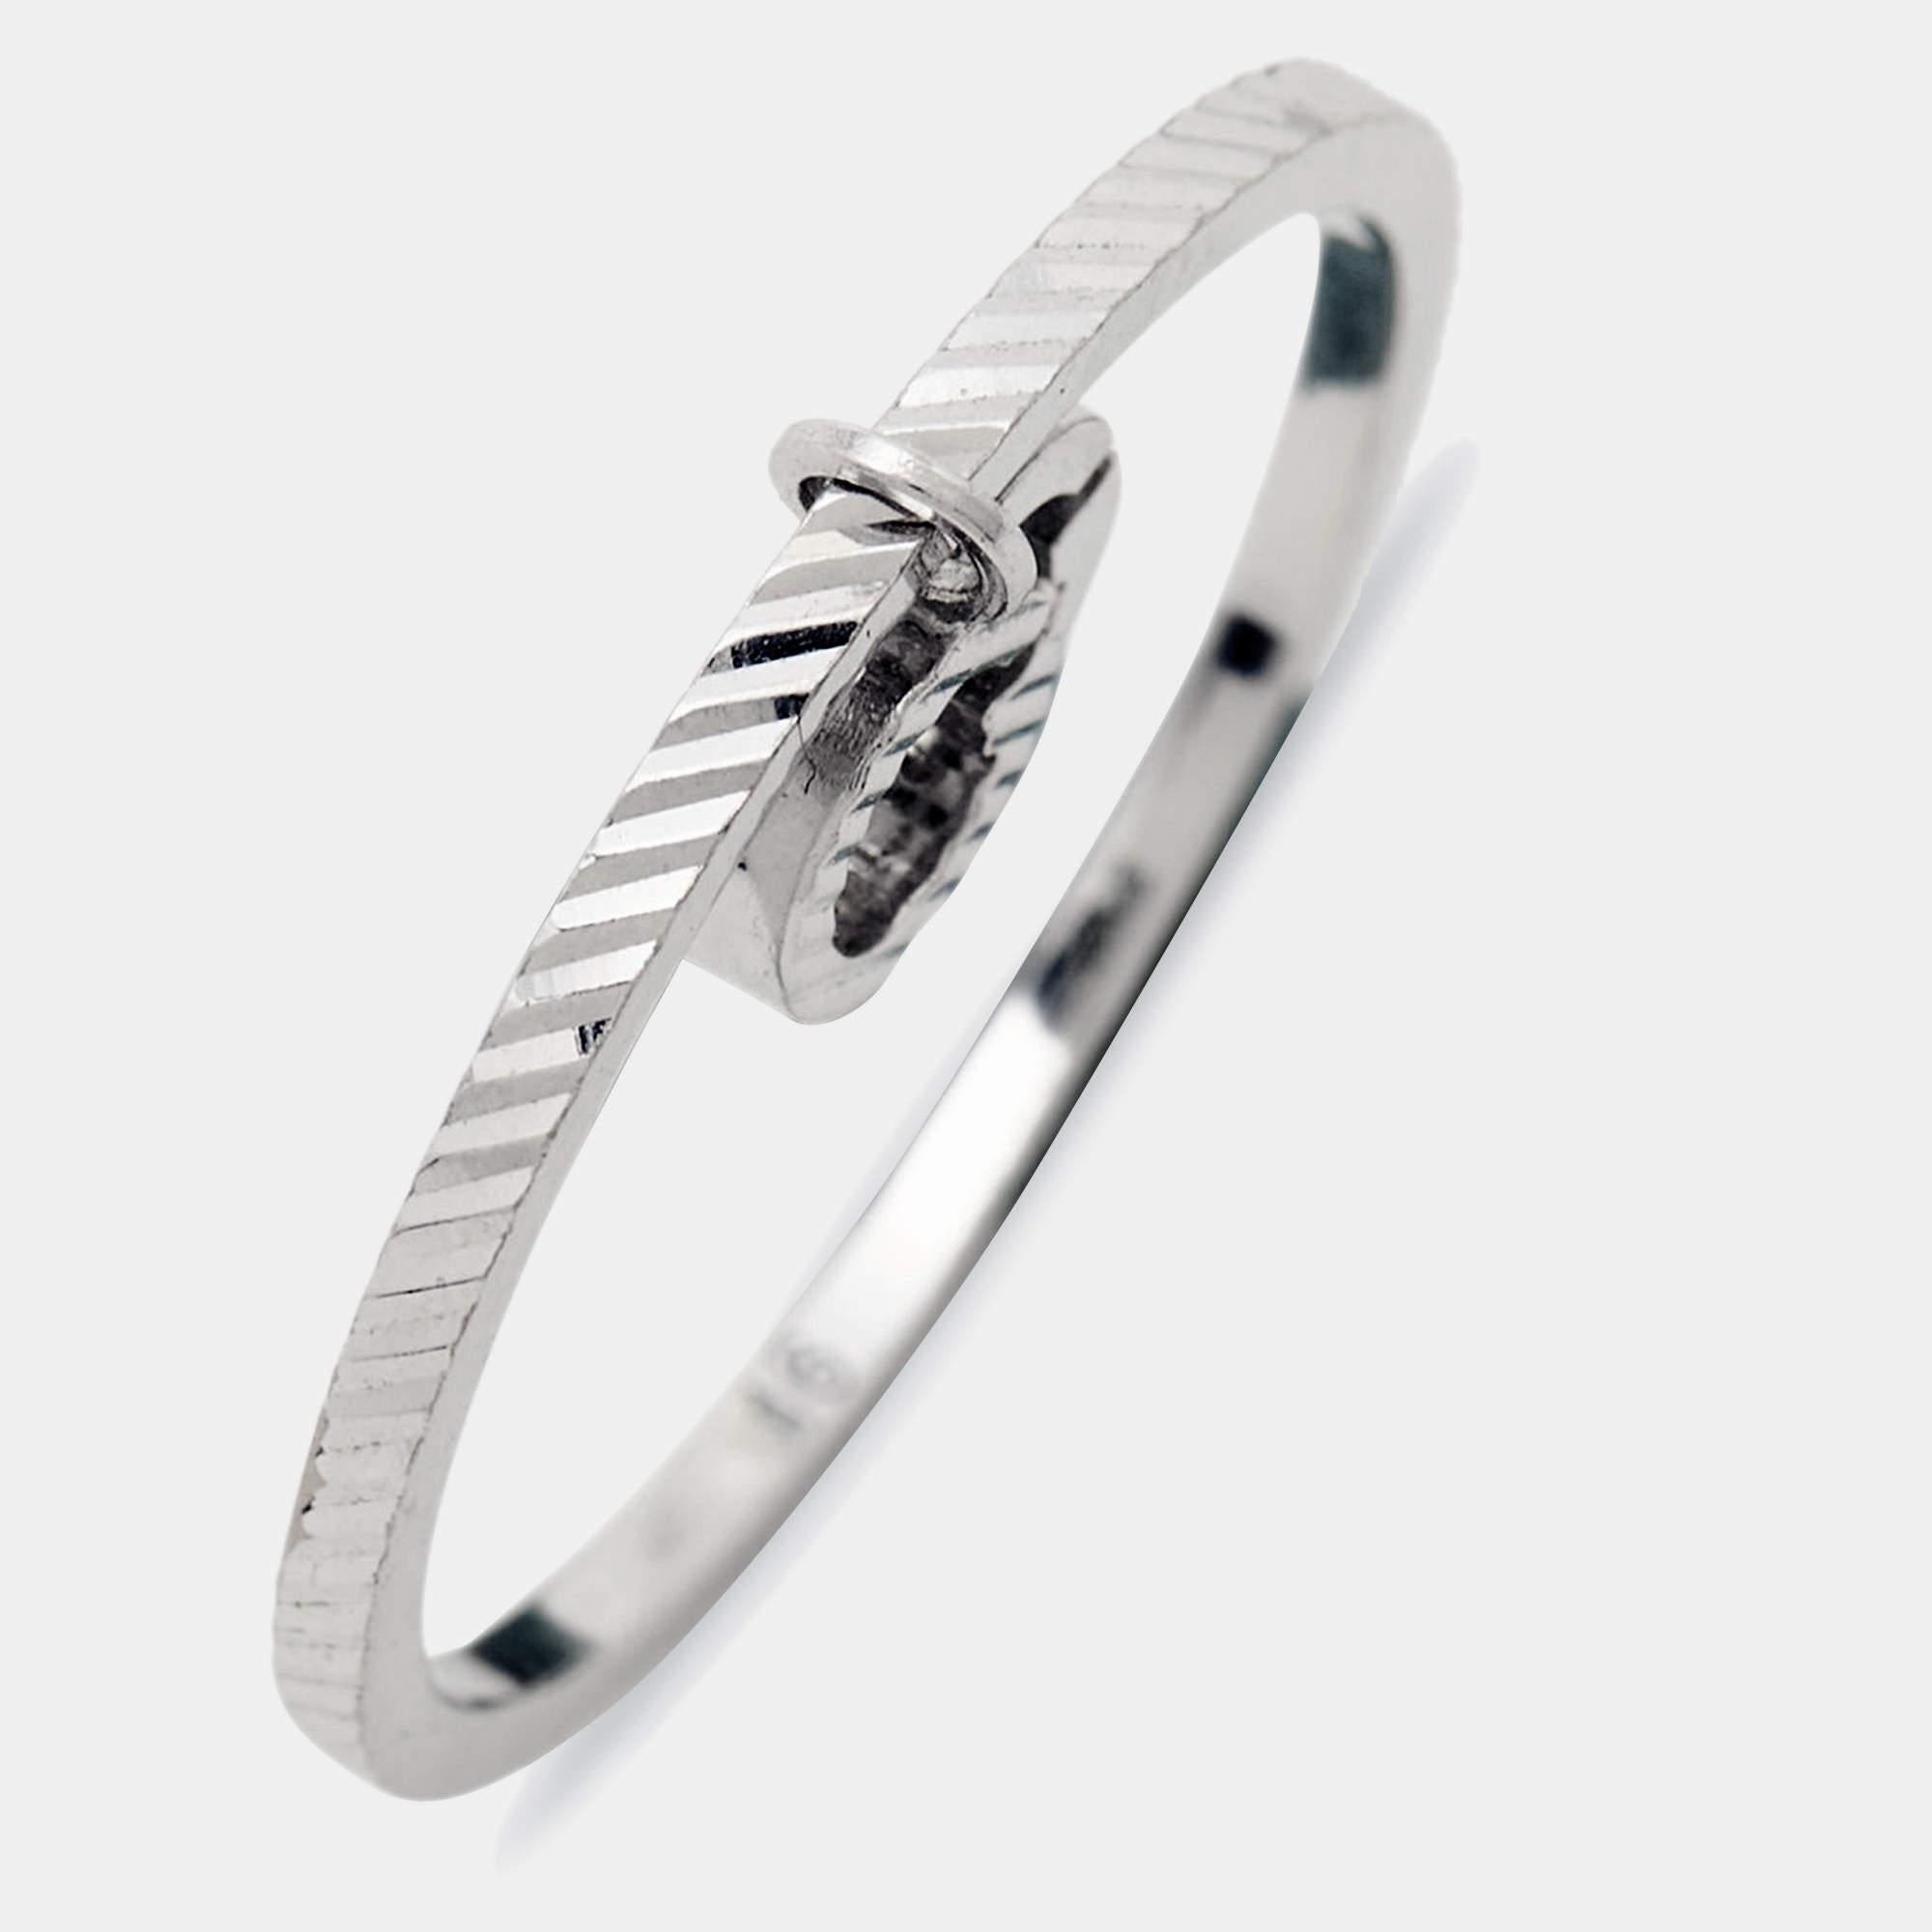 The Gucci GG Running ring is an exquisite and luxurious piece of jewelry. Crafted from stunning 18k white gold, it features the iconic GG logo intertwined with a delicate charm. This ring effortlessly blends elegance and fashion-forward style,